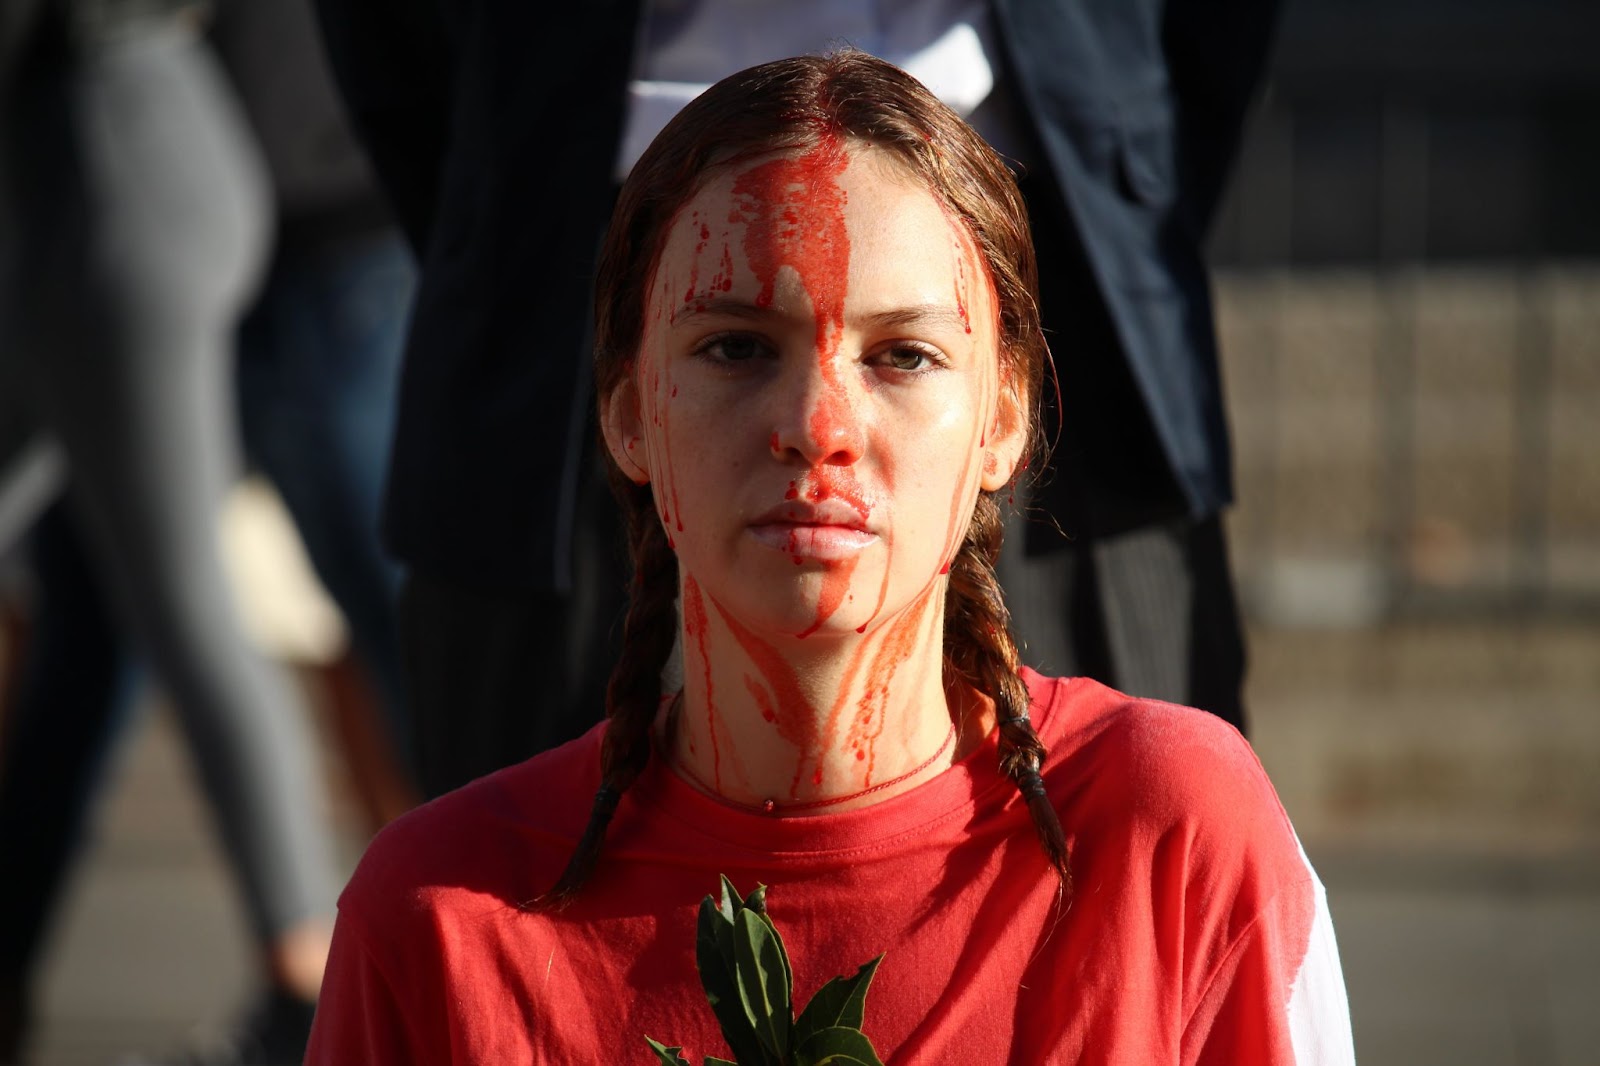 A young woman rebel looks to camera sadly. Fake blood has been poured down her face.